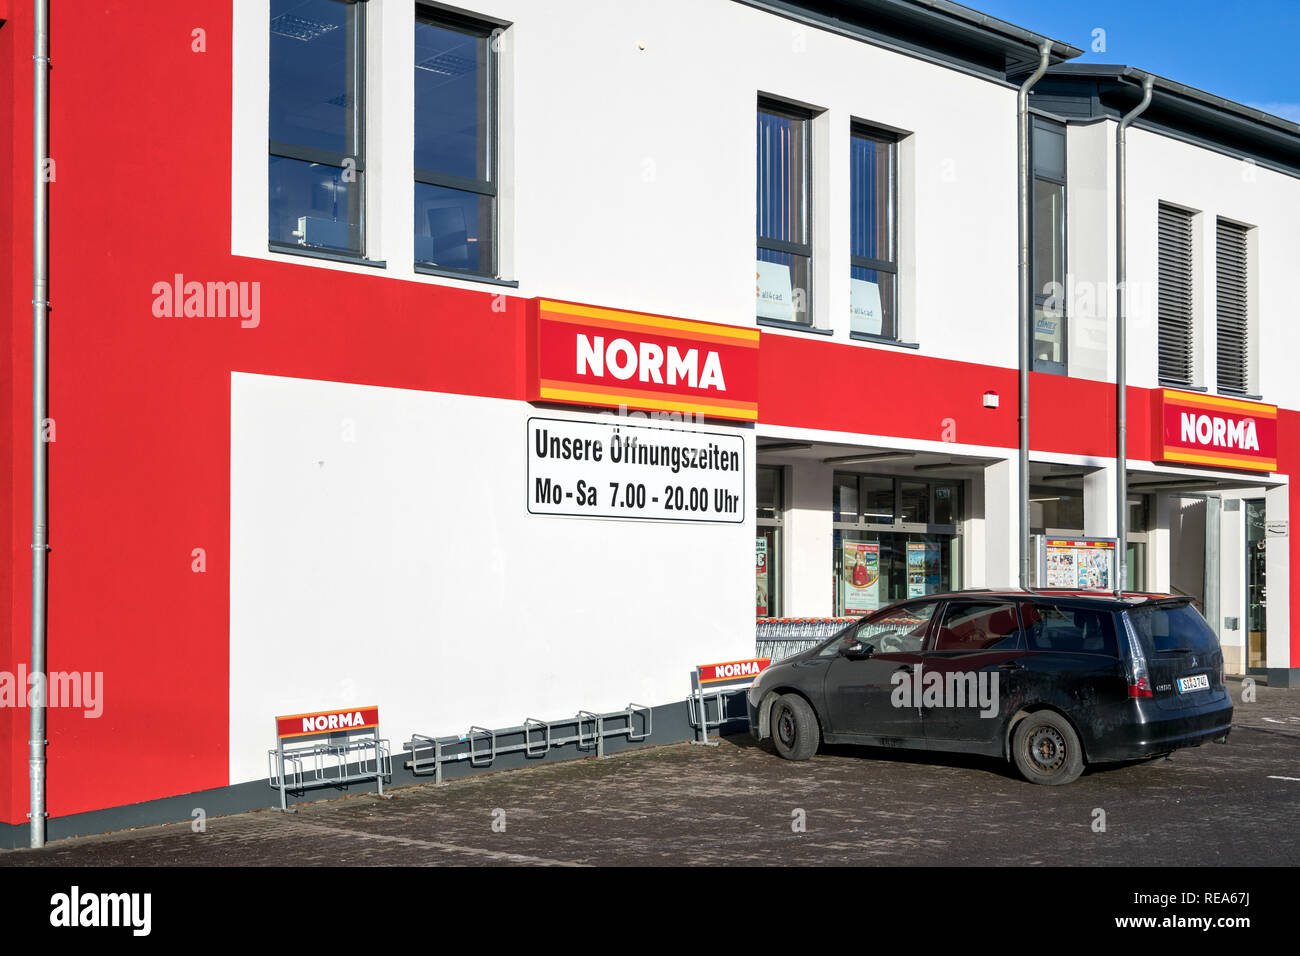 Norma branch in Kreuztal, Germany. Norma is a food discount store with more than 1,300 stores in Germany, Austria, France and the Czech Republic. Stock Photo